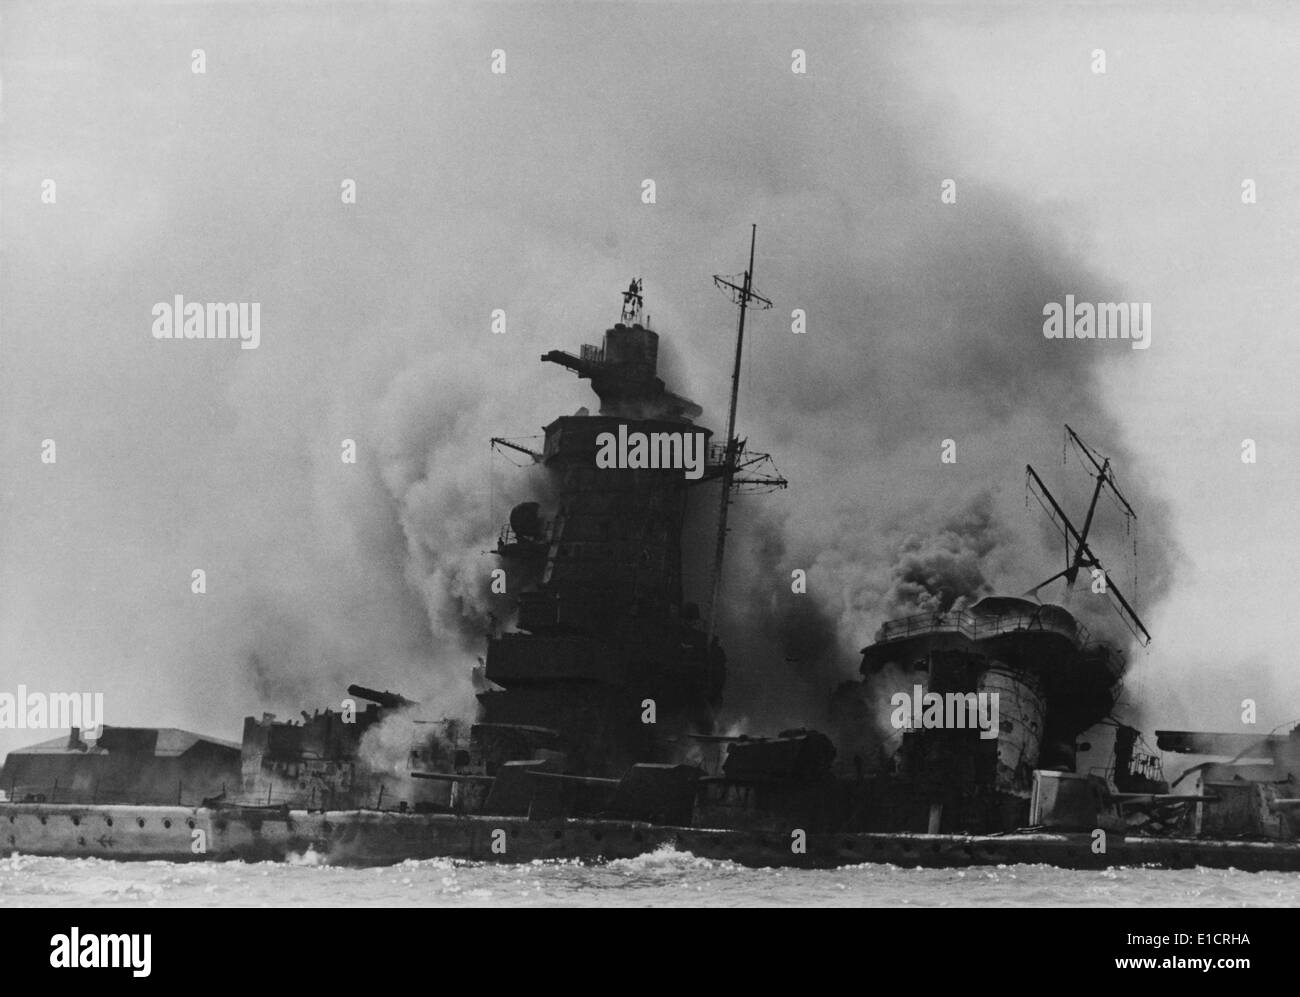 The German battleship 'Admiral Graf Spee', burning off Montevideo, Uruguay, Dec. 19, 1939. After the 'Battle of the River Stock Photo